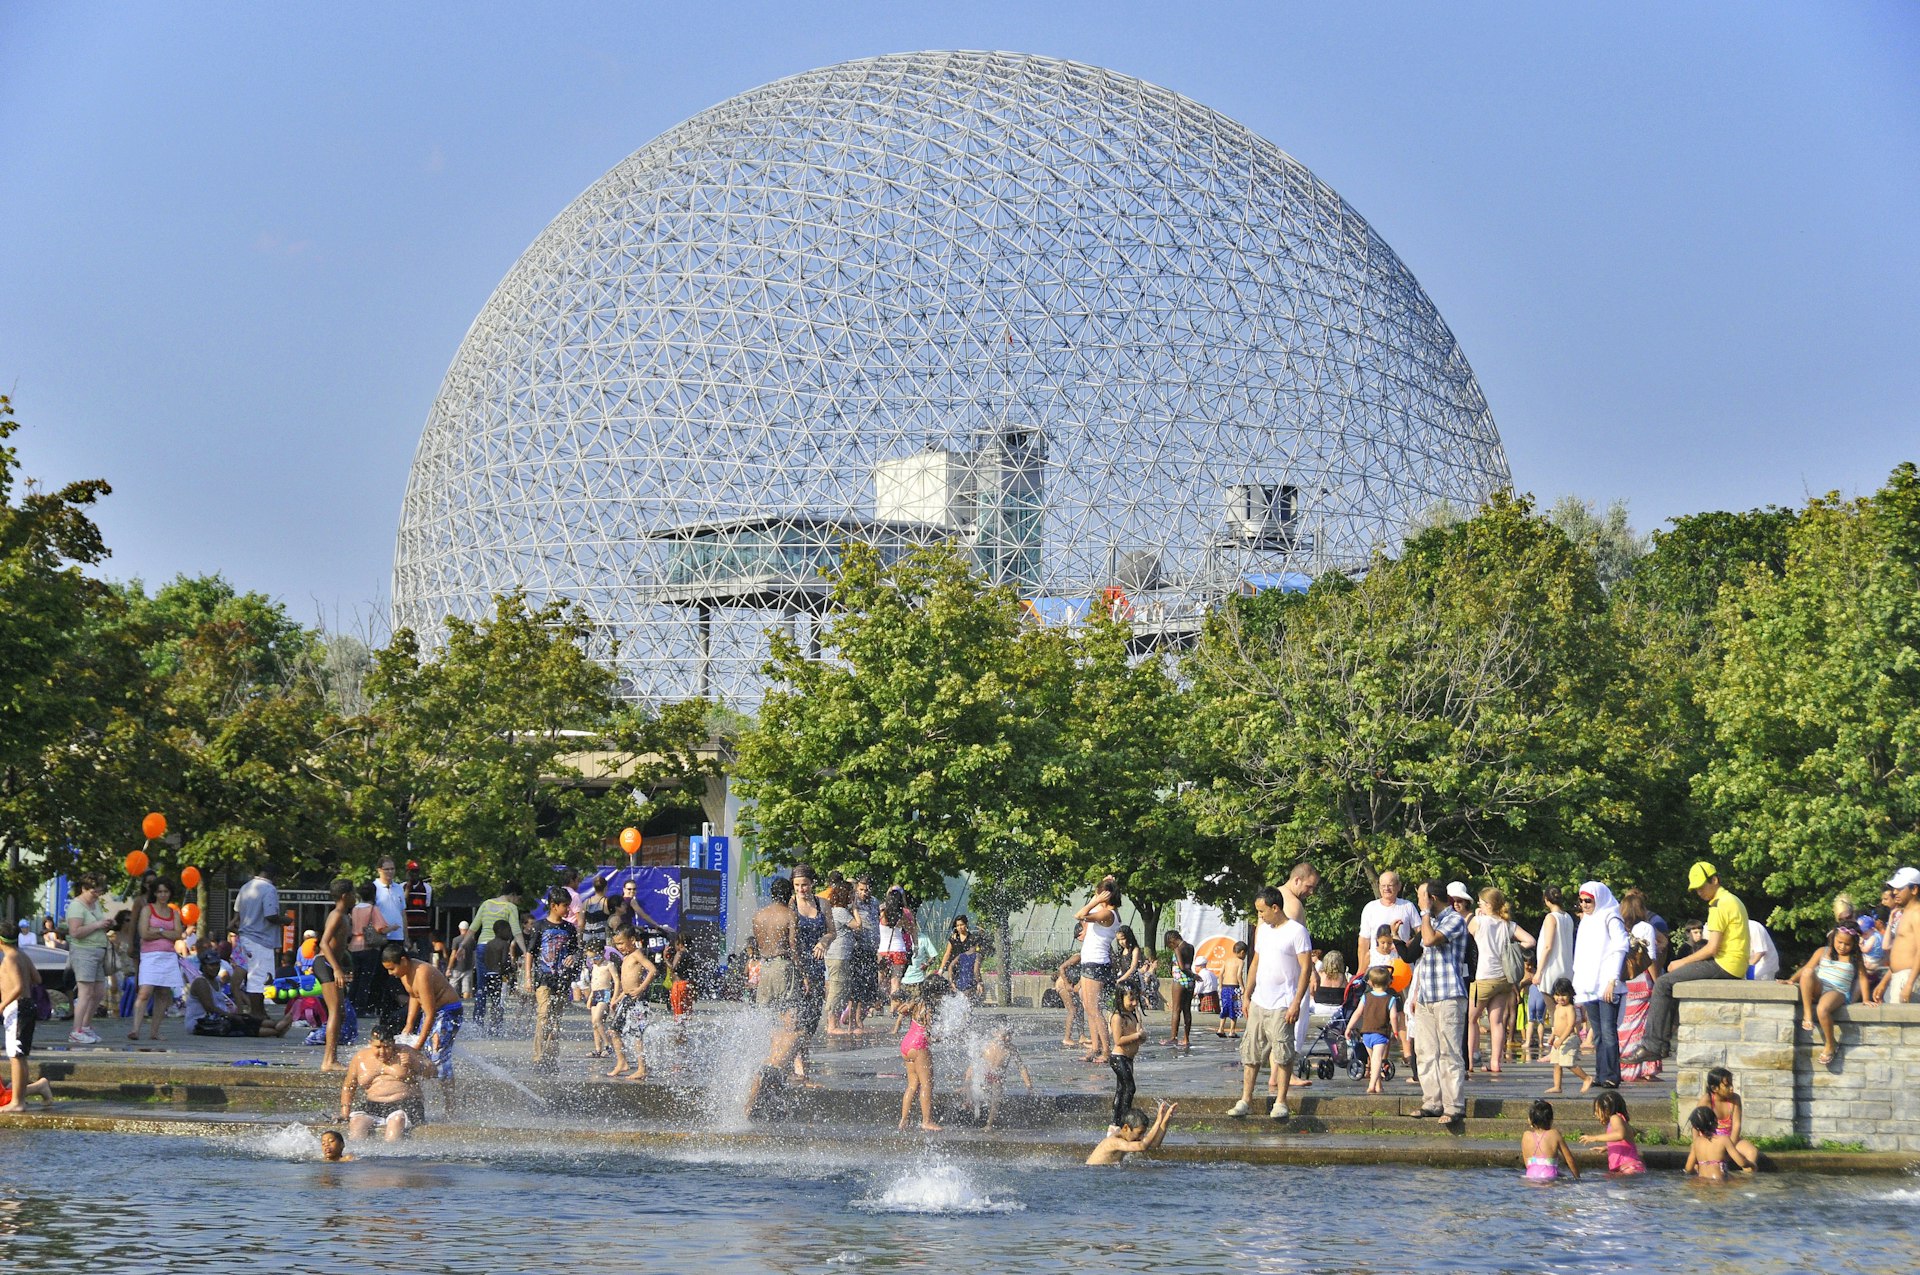 Kids and families play in water fountains near a vast dome-like structure